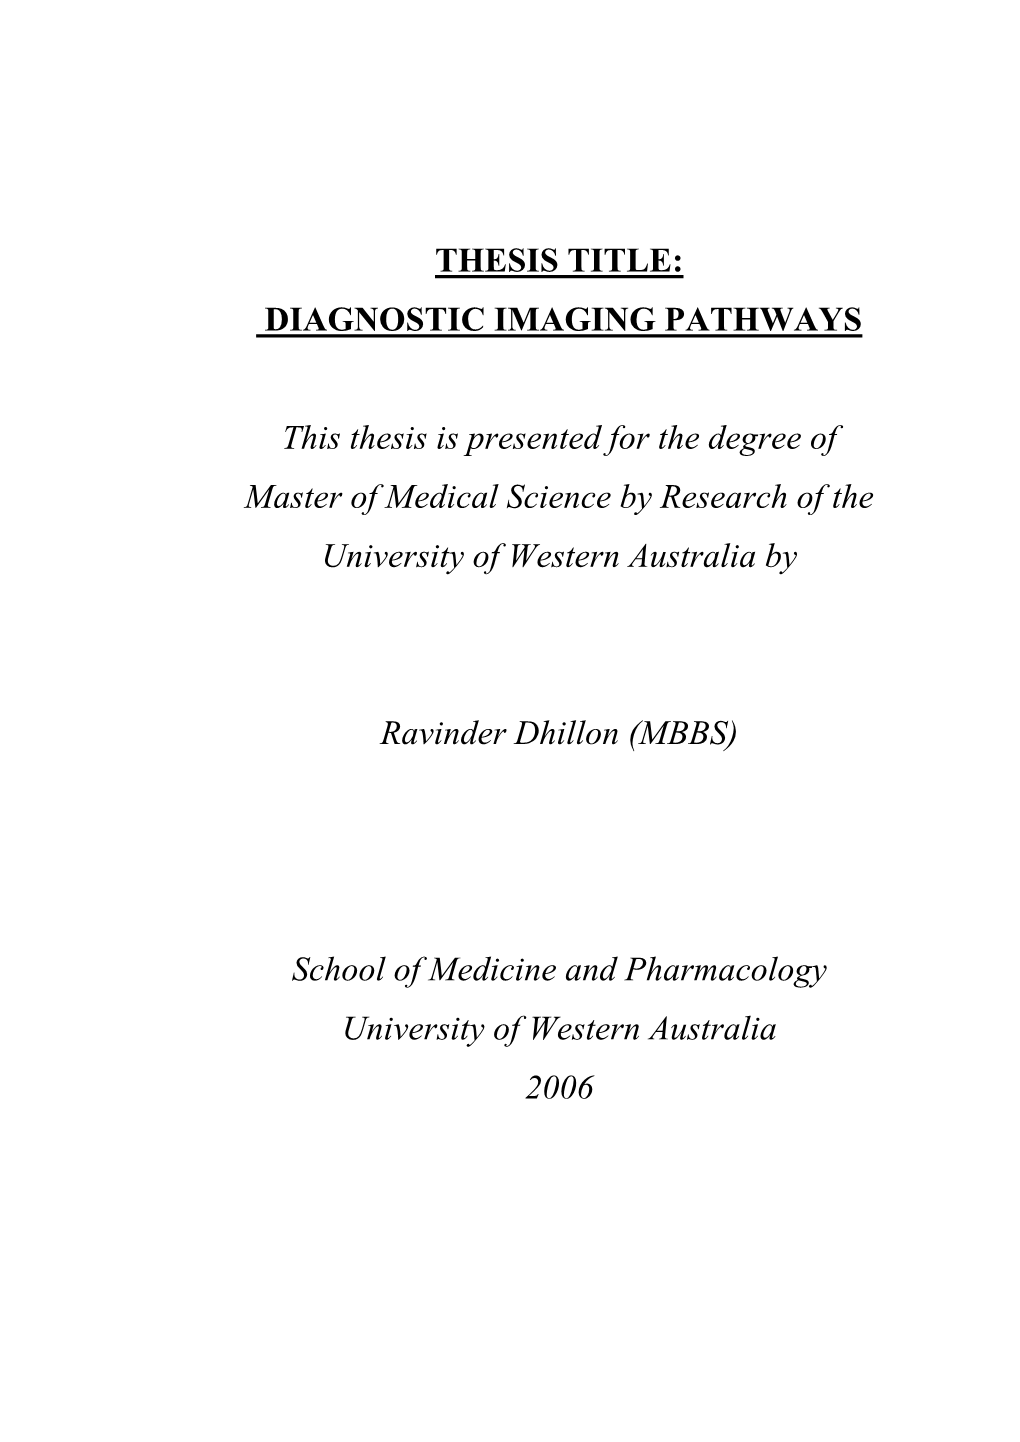 DIAGNOSTIC IMAGING PATHWAYS This Thesis Is Presented for The